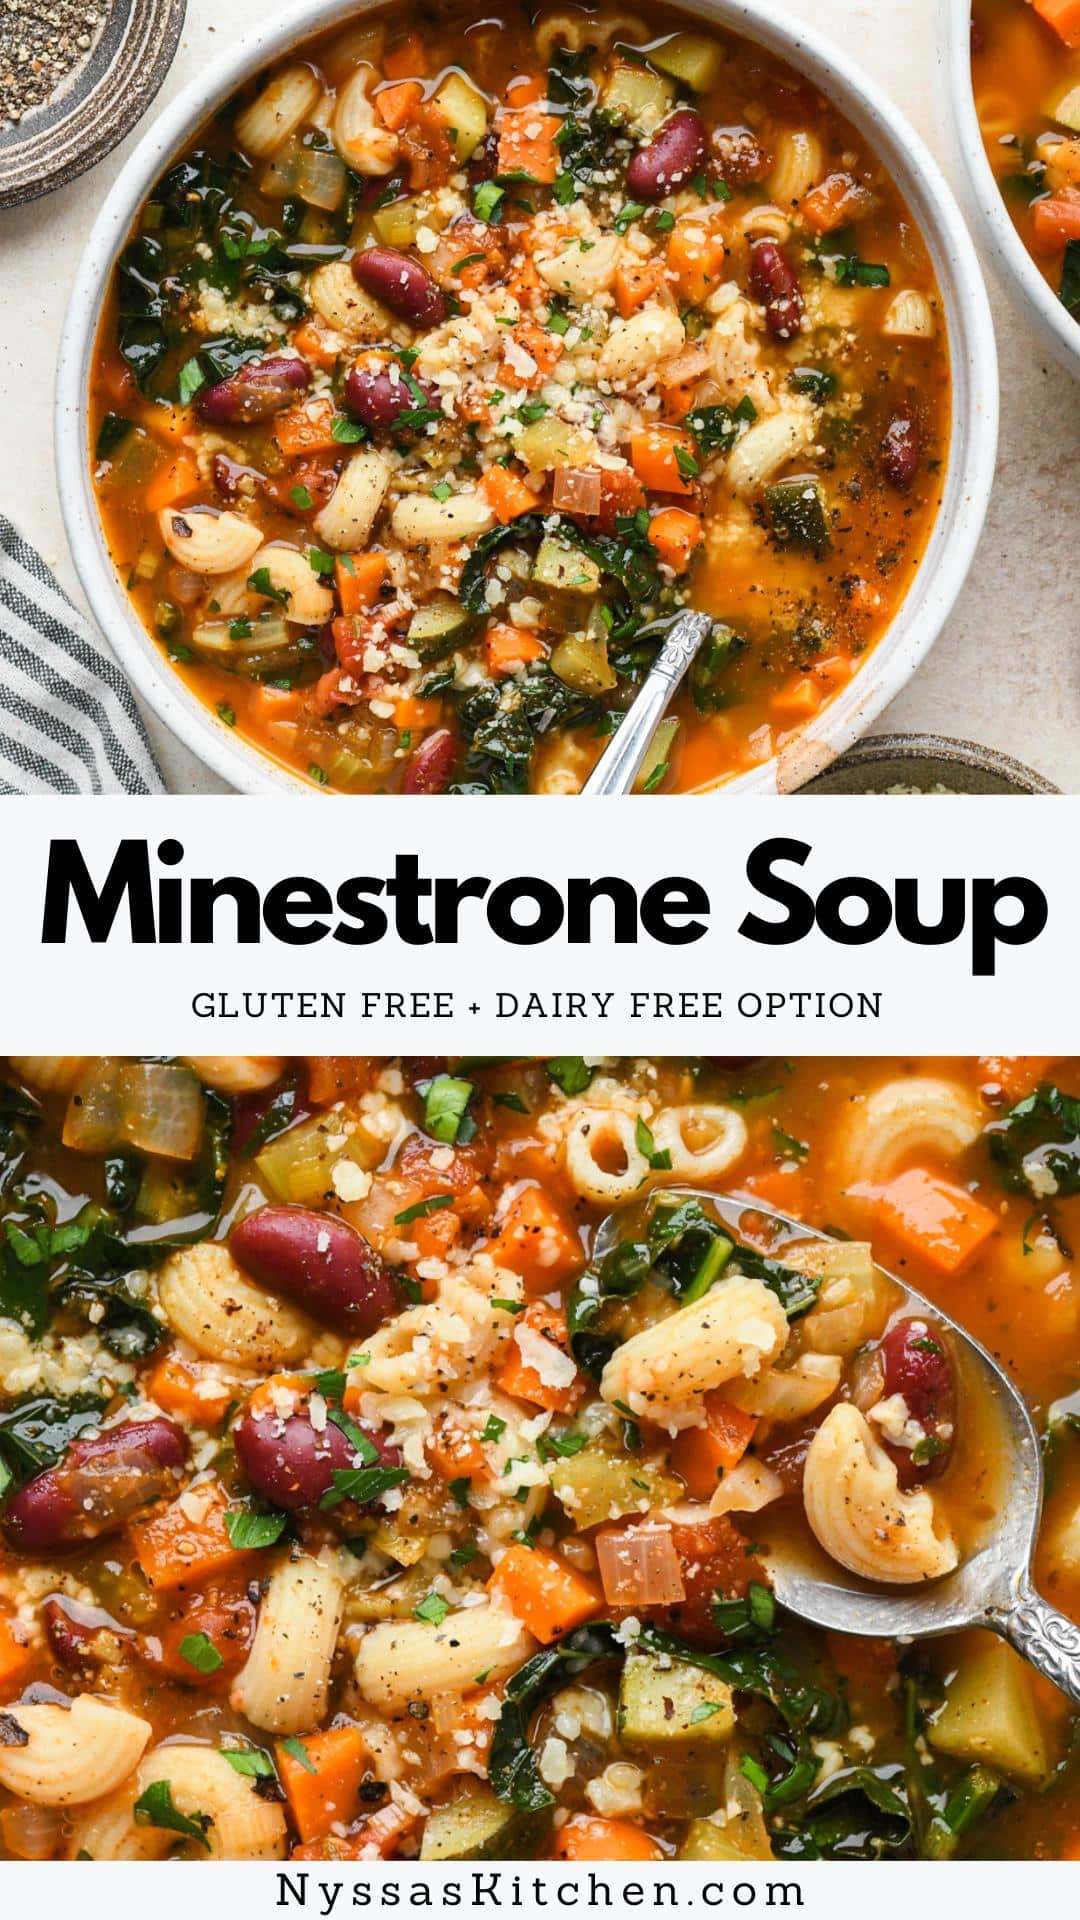 This gluten free minestrone soup features a variety of flavorful and nutritious vegetables like carrots, celery, onions, zucchini, and kale. An Italian inspired recipe with lovely complex layers of flavor thanks to a few dried spices and tomato paste that can be made in less than an hour. It's vegetarian (and vegan if you use a vegan parmesan) but can also be made with protein if that's your thing. A delightfully cozy recipe to make during the colder months of the year! 